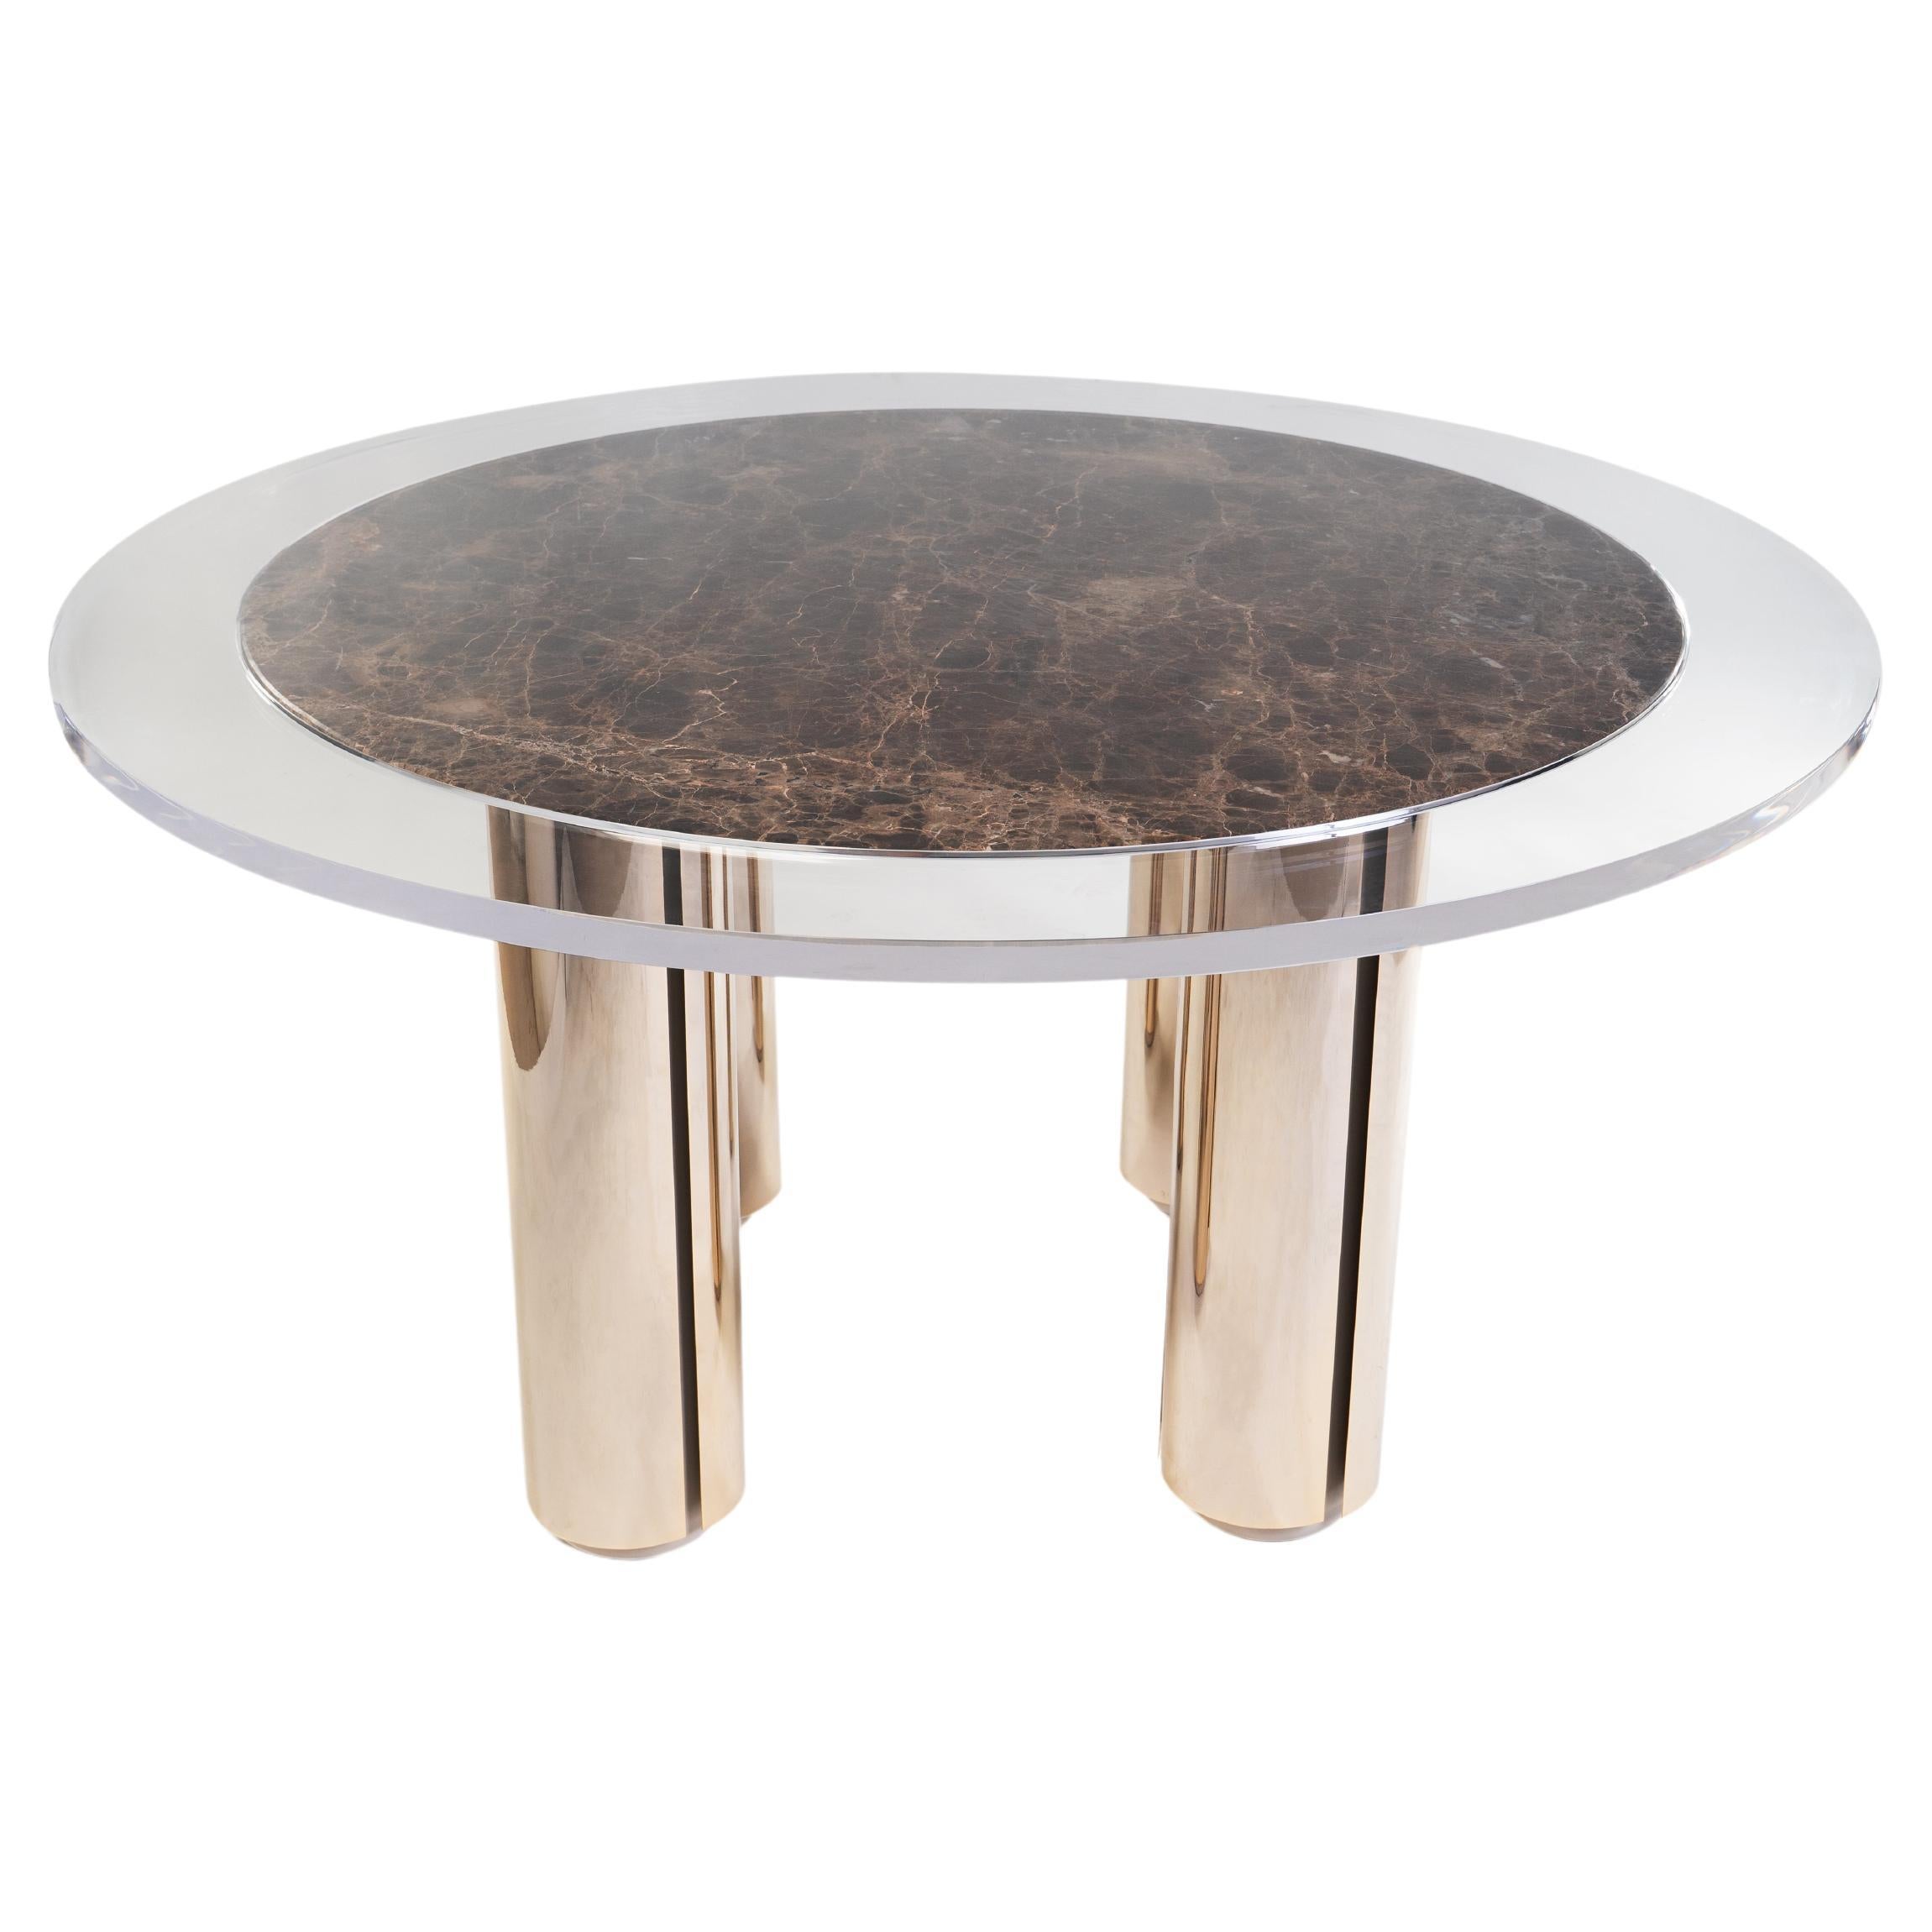 Modern Marble and Plated Stainless Steel Outdoor Dining Table For Sale